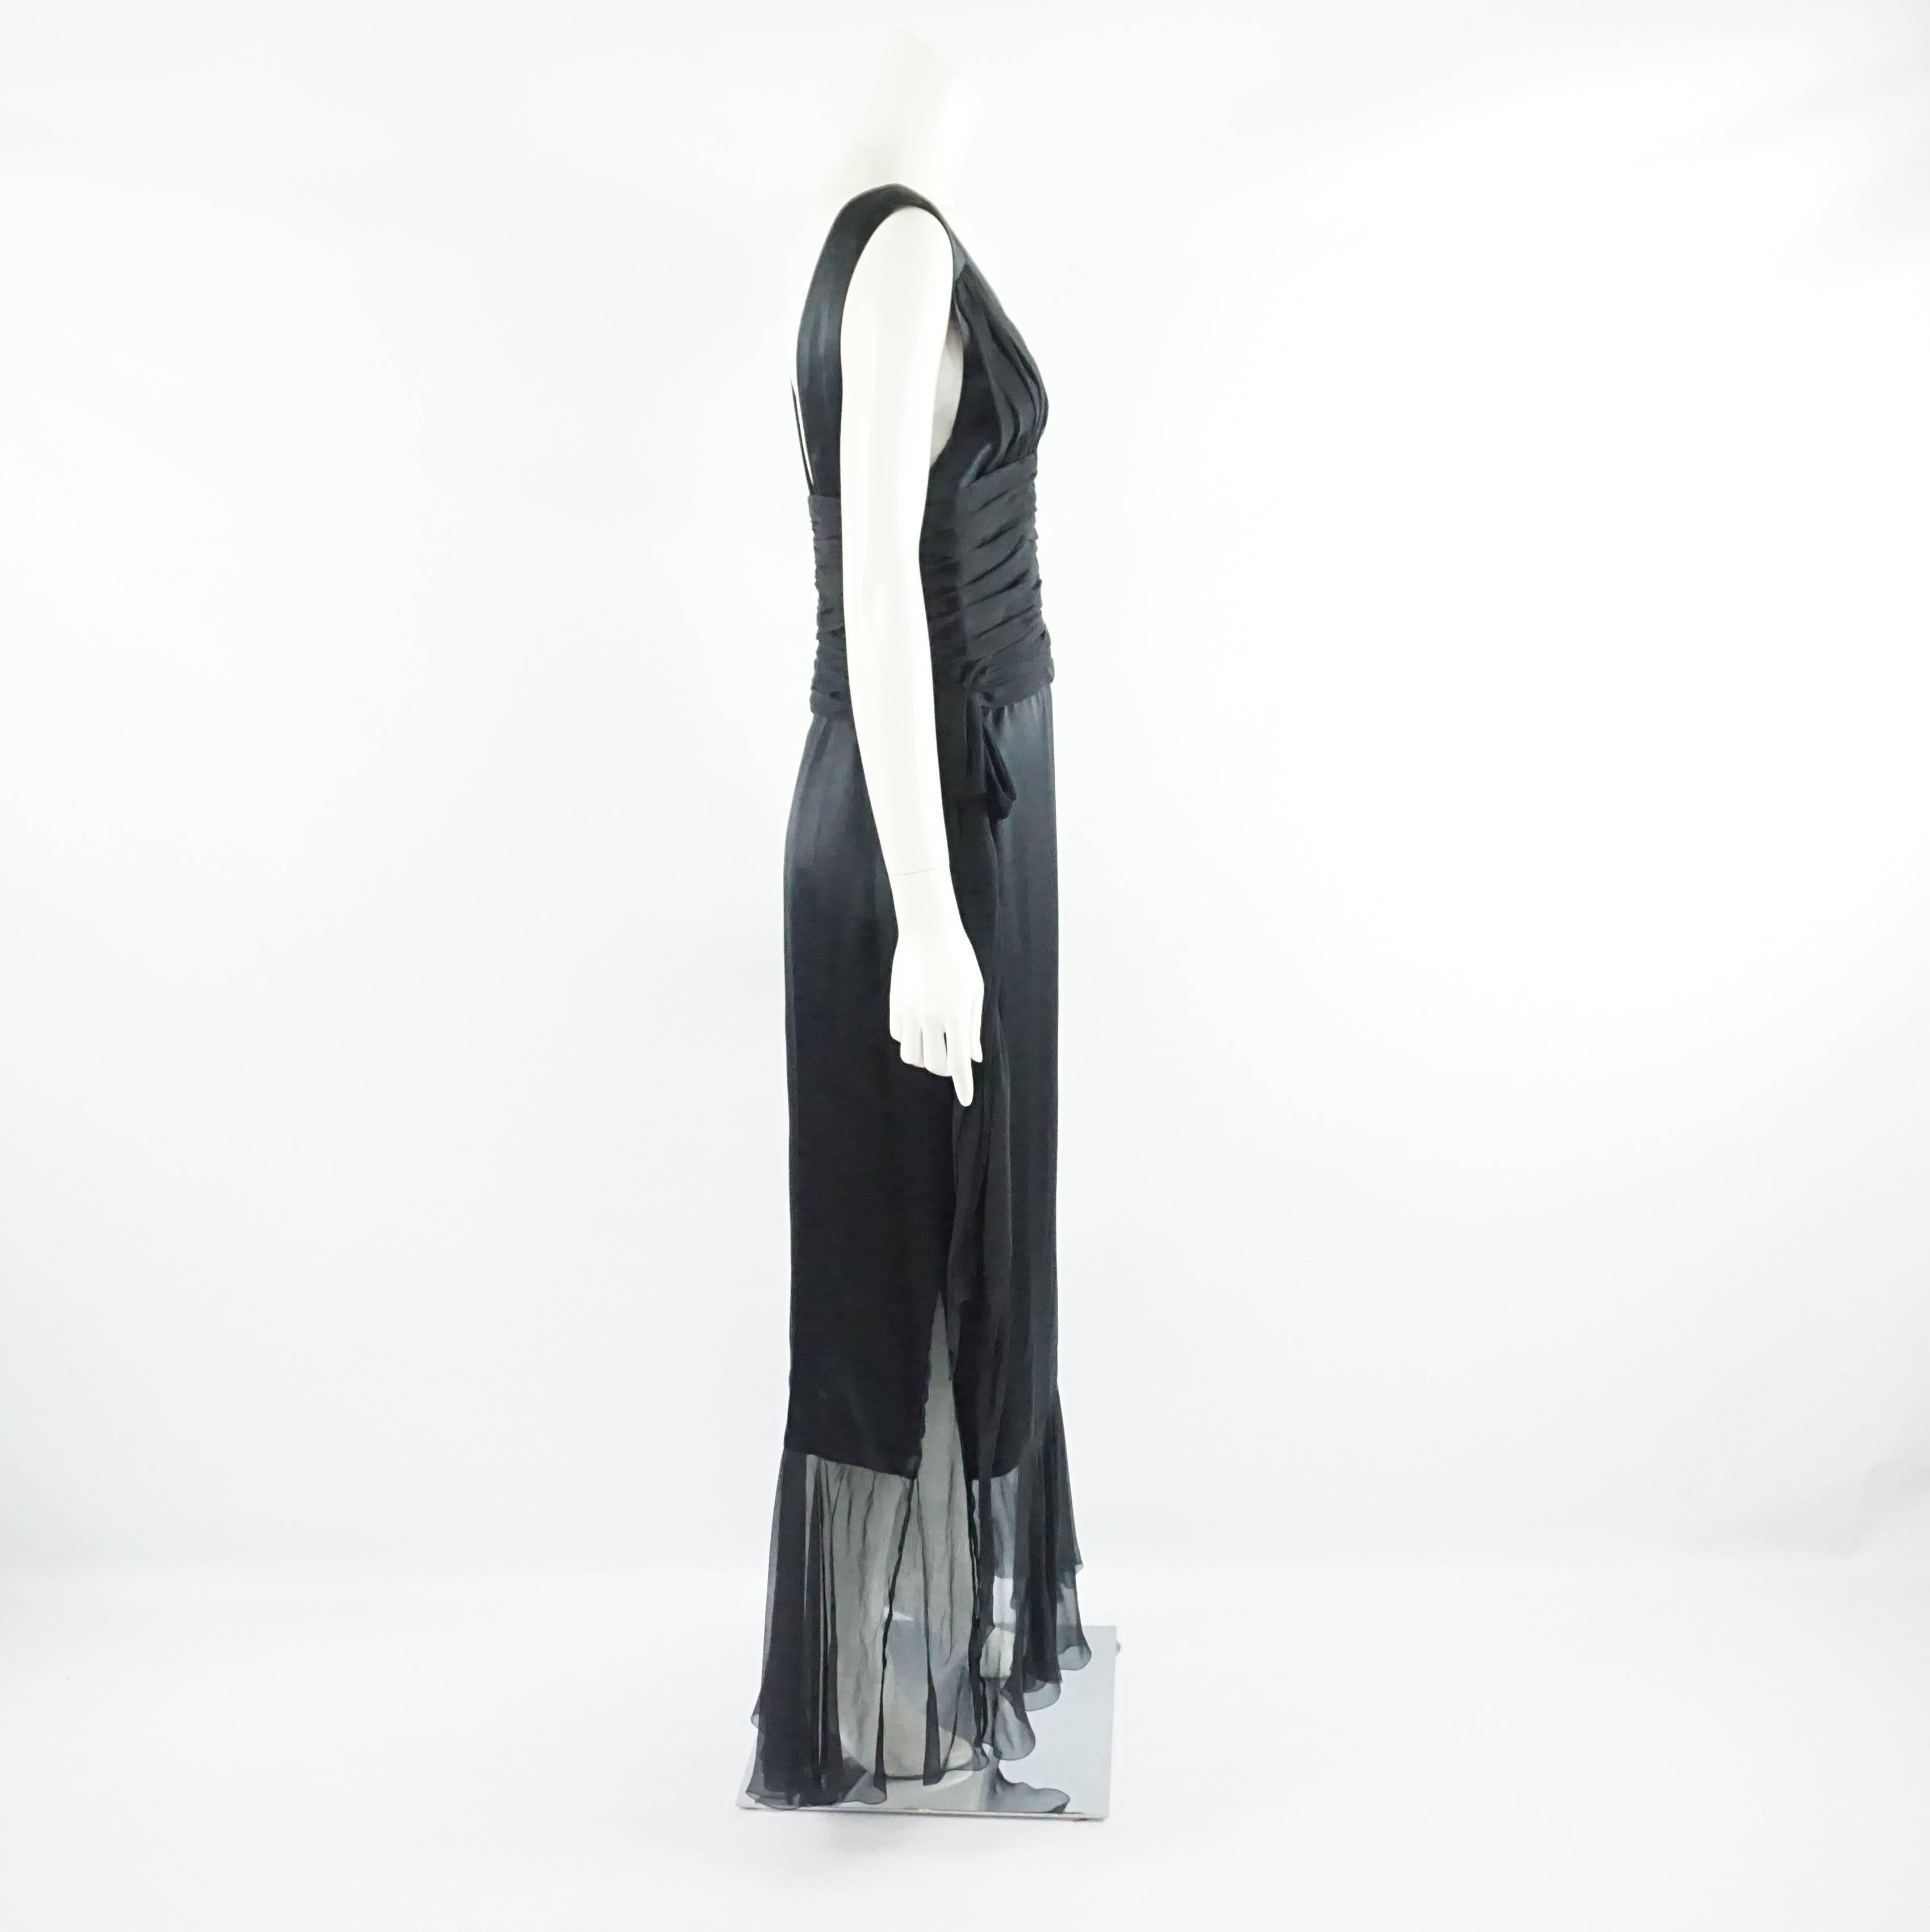 This Chanel silk chiffon gown is black and sleeveless. It features a v-neck and a low back. There is a bow on both sides of the waist. This gown is in excellent condition. It is from the 06A collection.

Measurements
Bust: 36